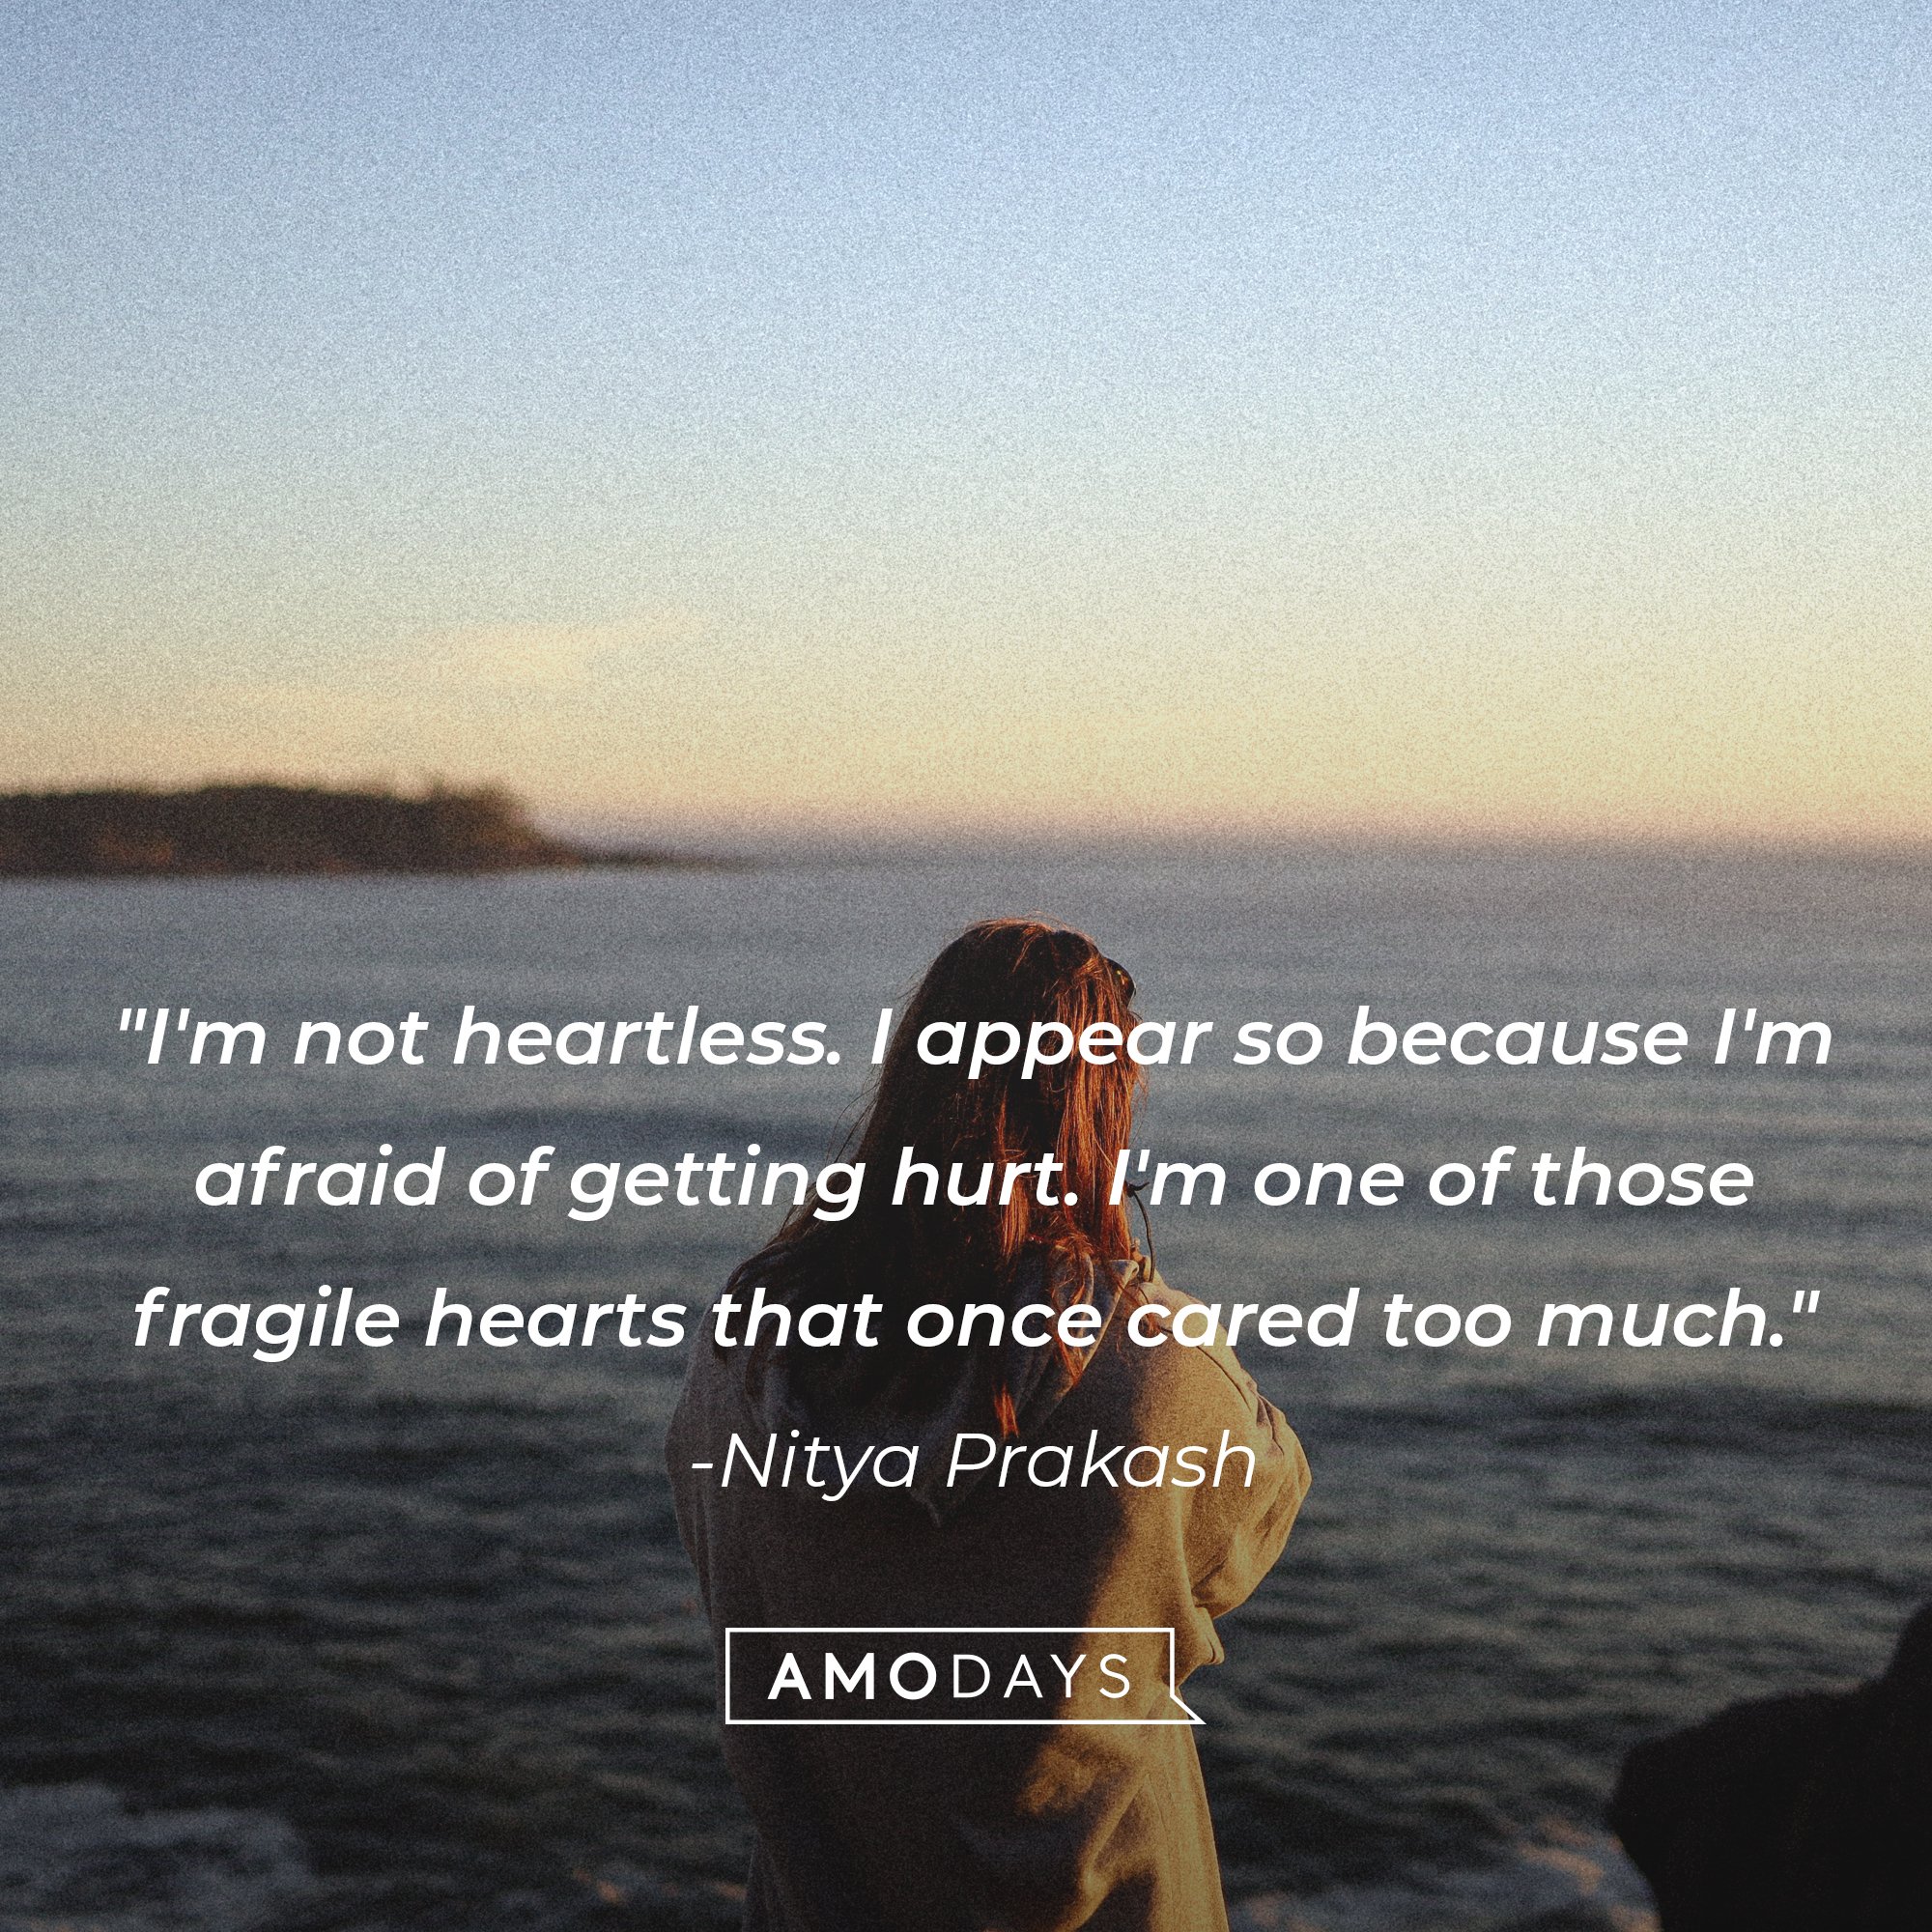 Nitya Prakash's quote: "I'm not heartless. I appear so because I'm afraid of getting hurt. I'm one of those fragile hearts that once cared too much." | Image: AmoDays